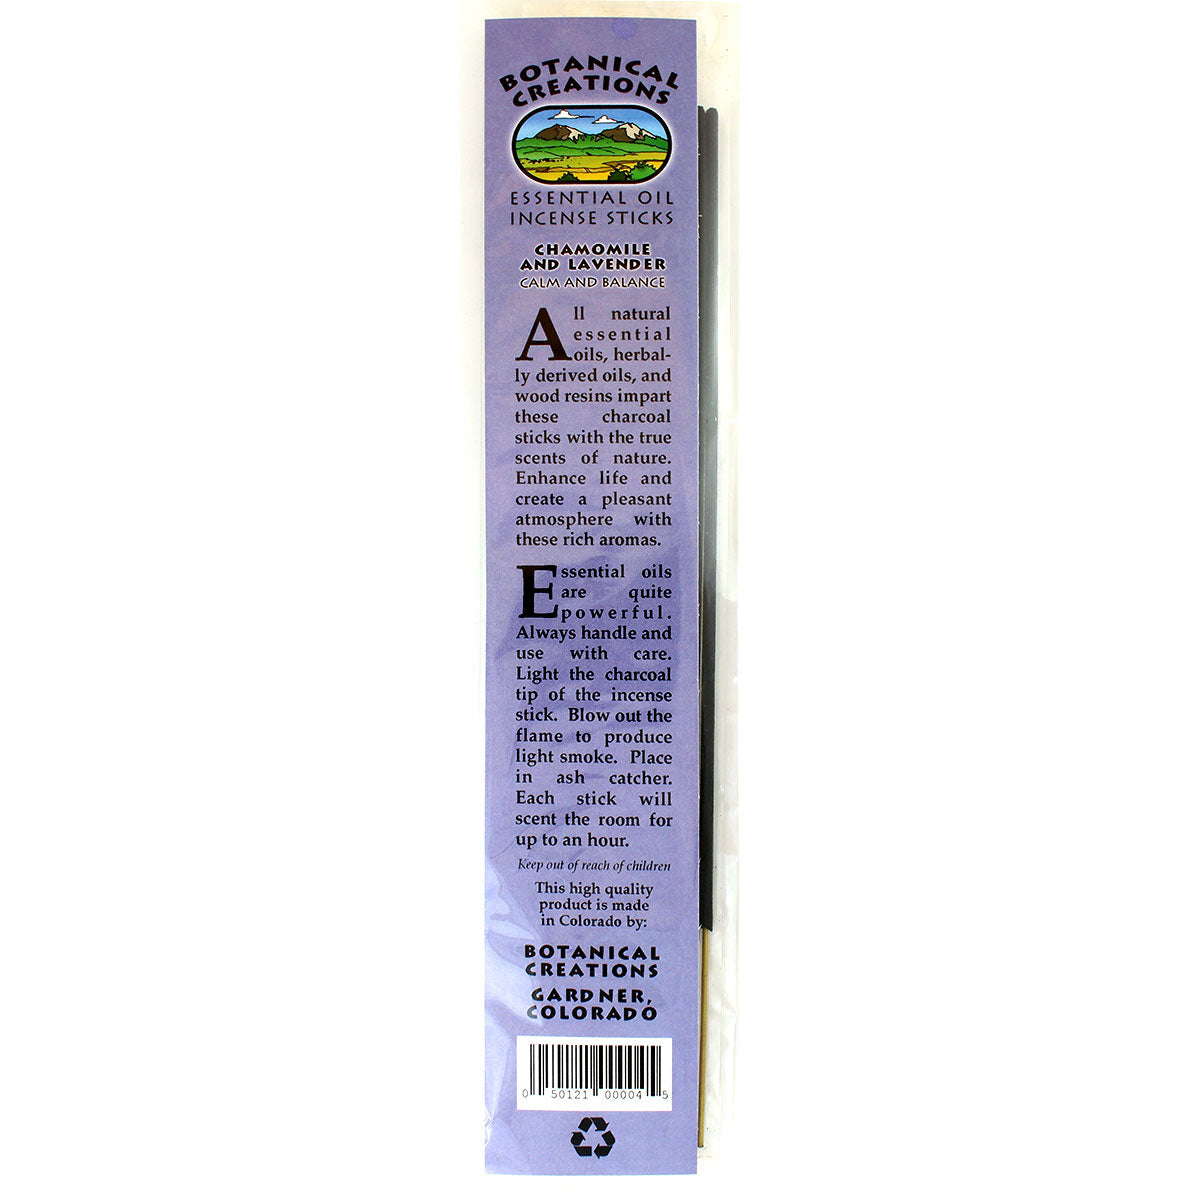 Botanical Creations: Chamomile and Lavender Essential Oil Incense